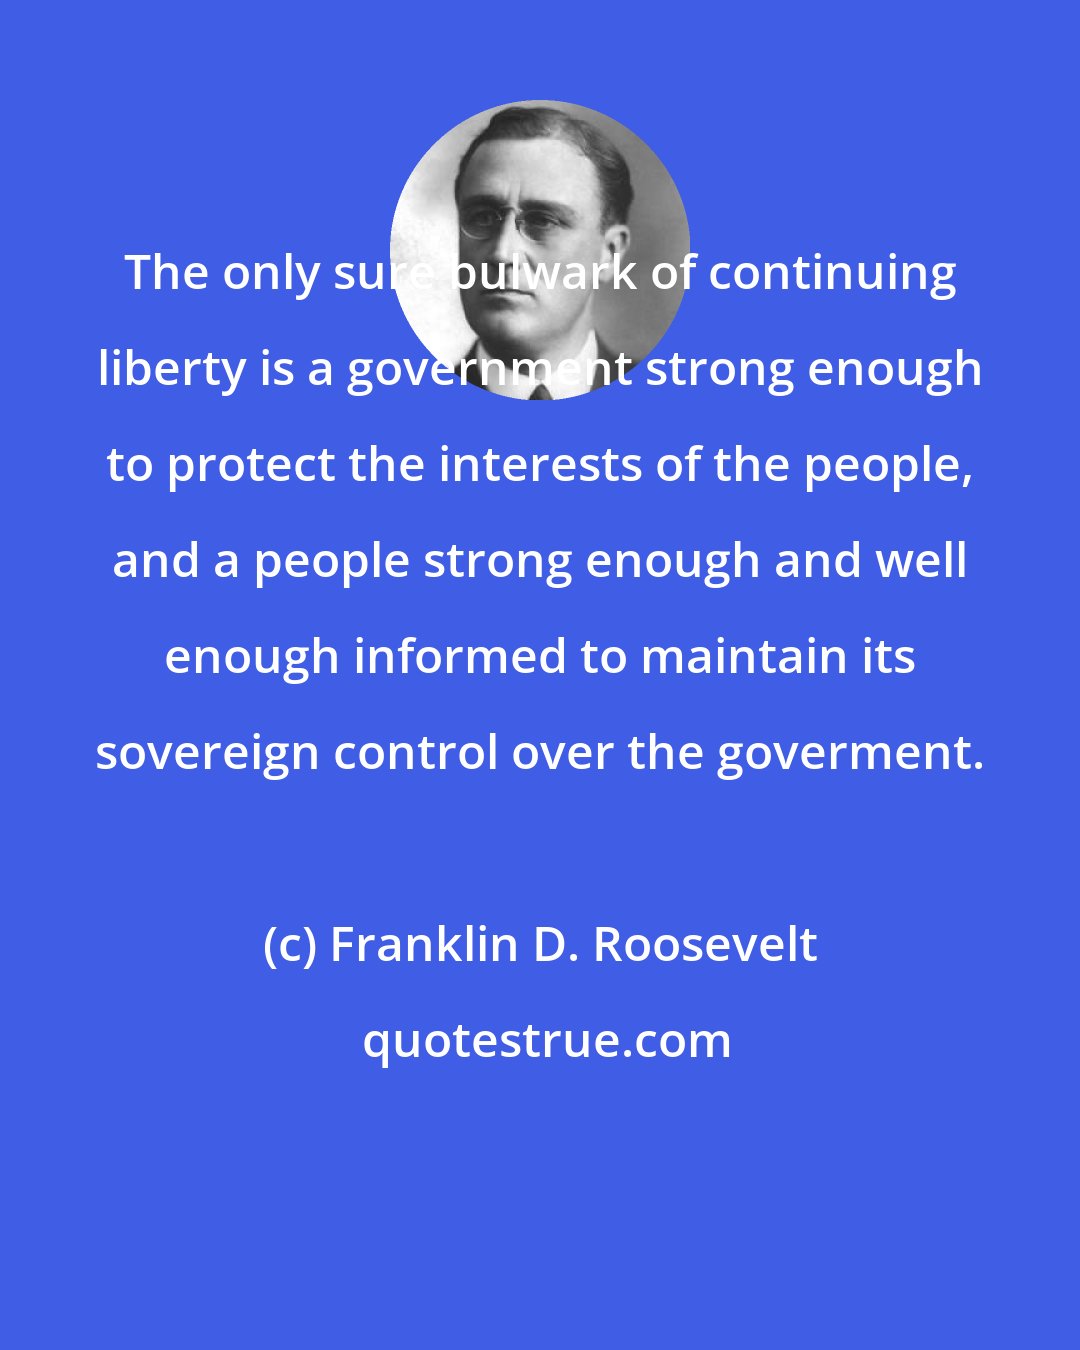 Franklin D. Roosevelt: The only sure bulwark of continuing liberty is a government strong enough to protect the interests of the people, and a people strong enough and well enough informed to maintain its sovereign control over the goverment.